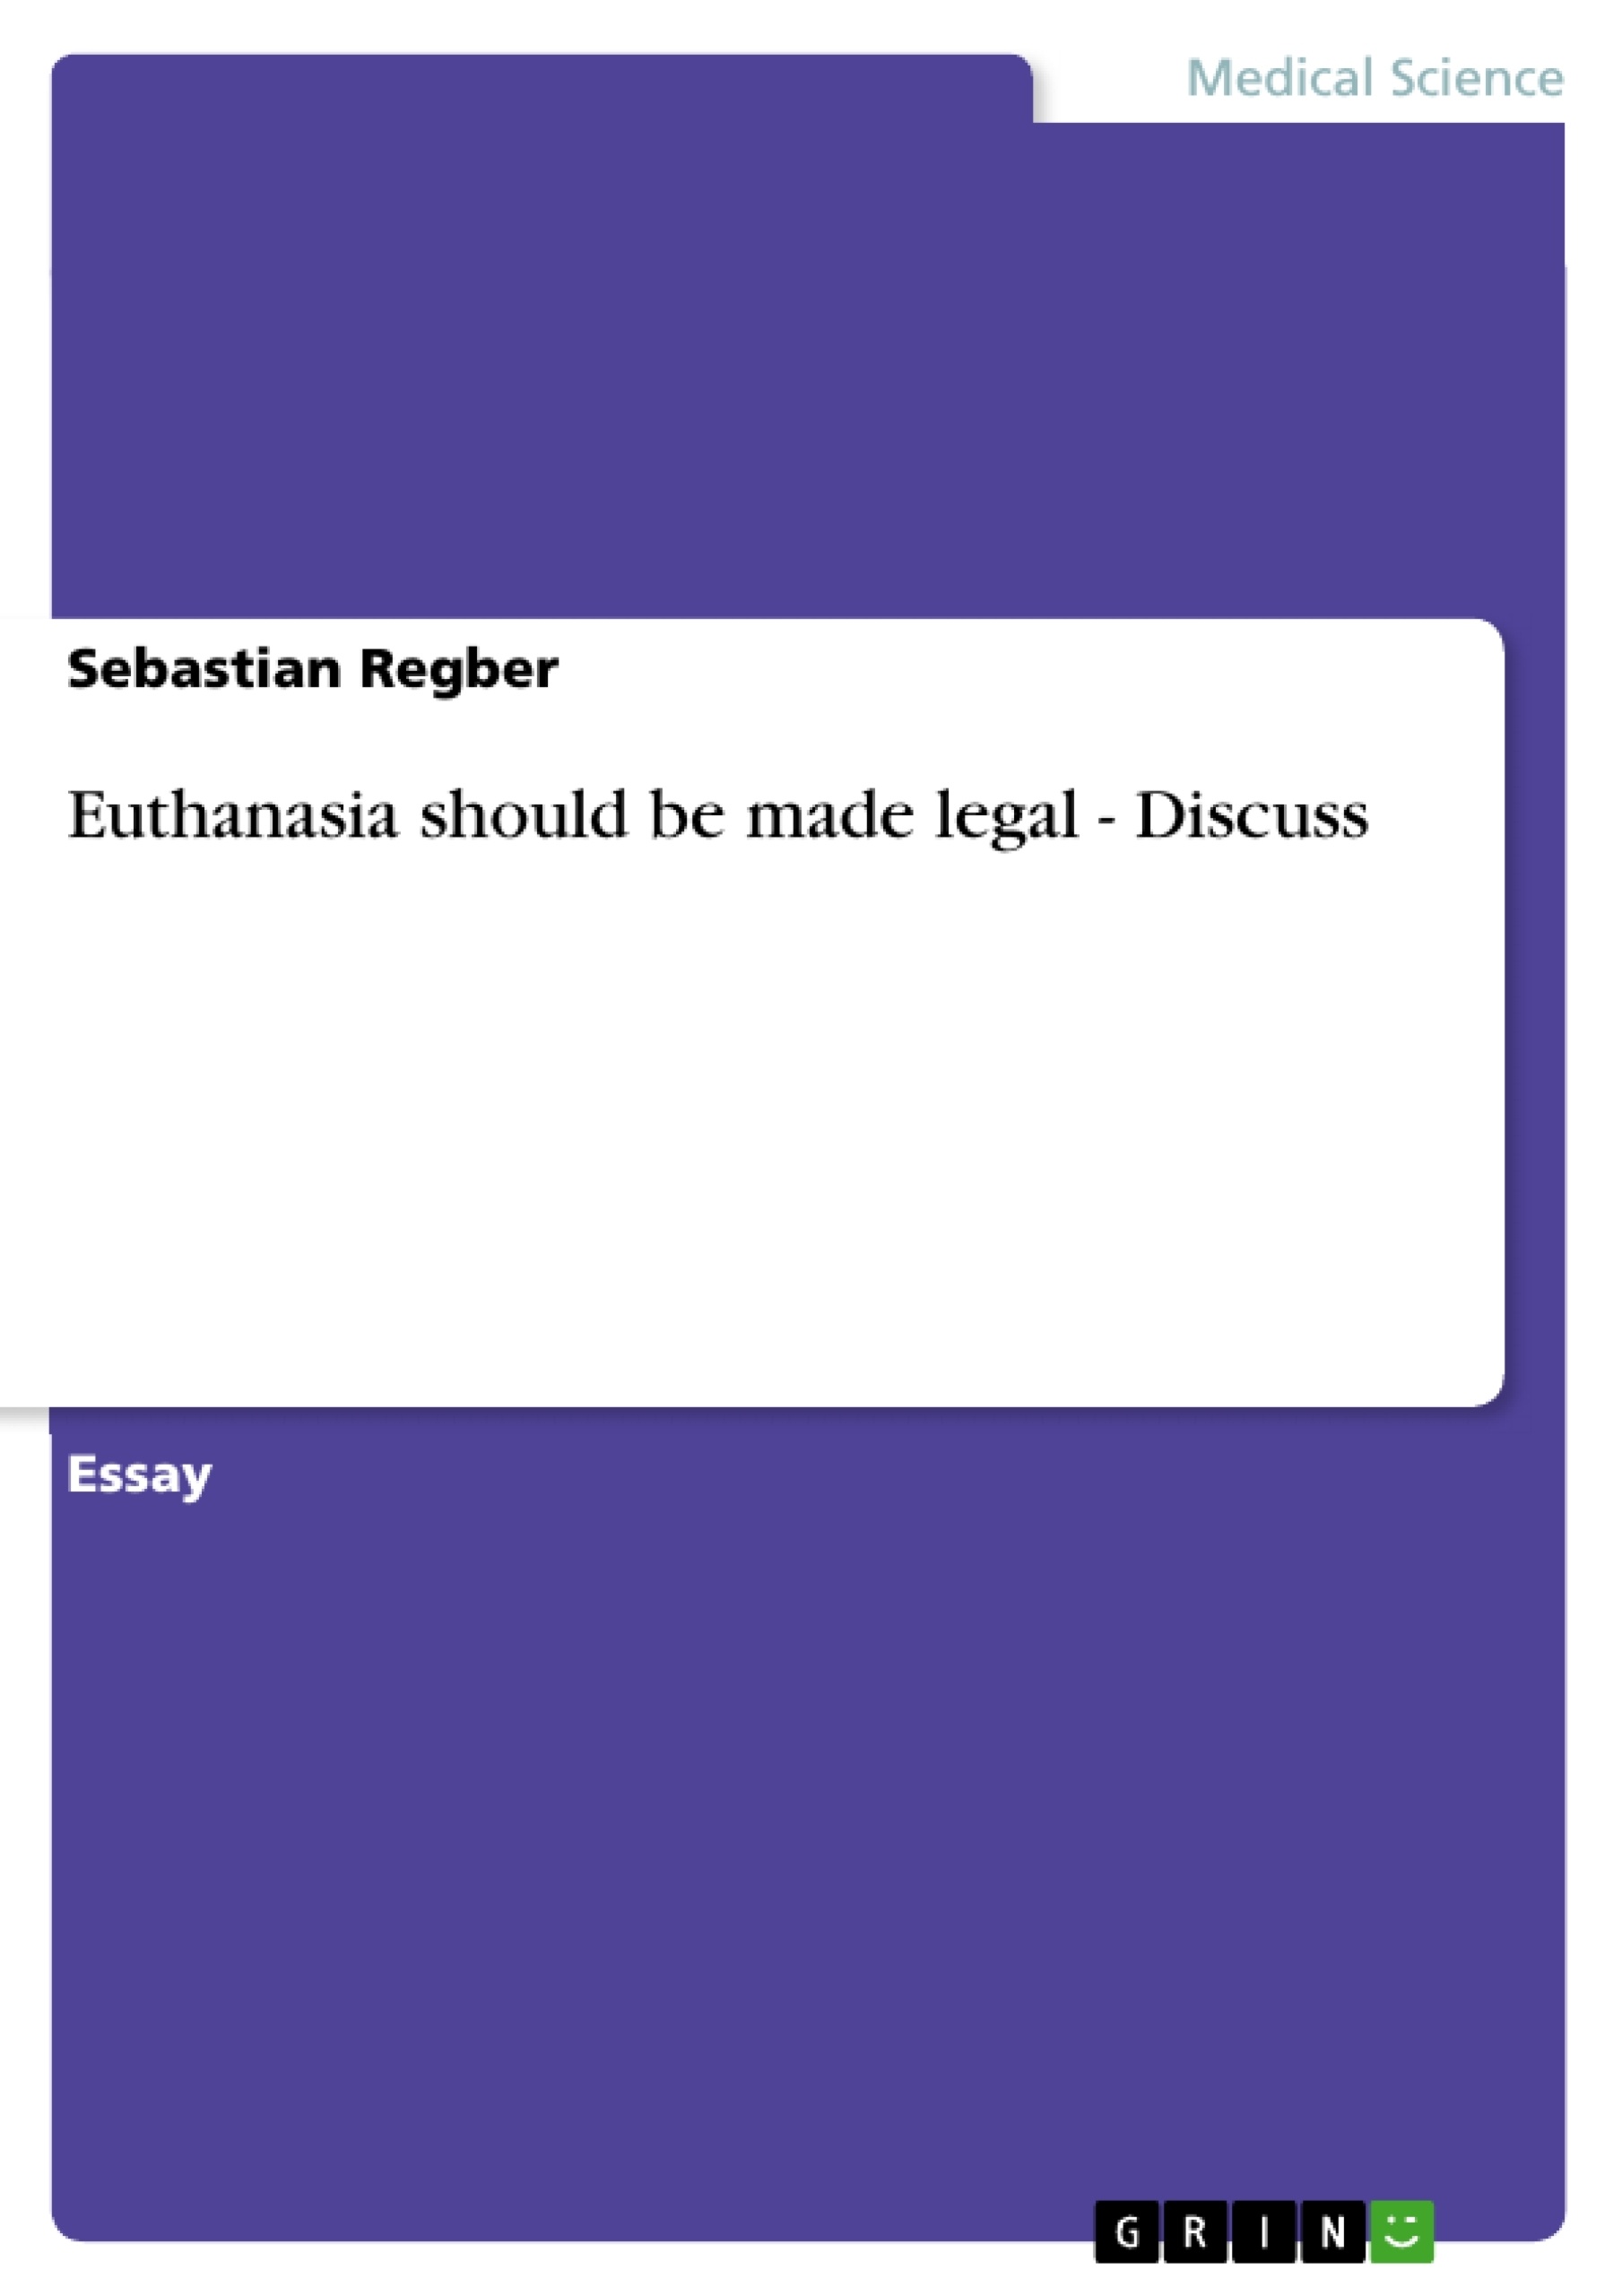 Title: Euthanasia should be made legal - Discuss